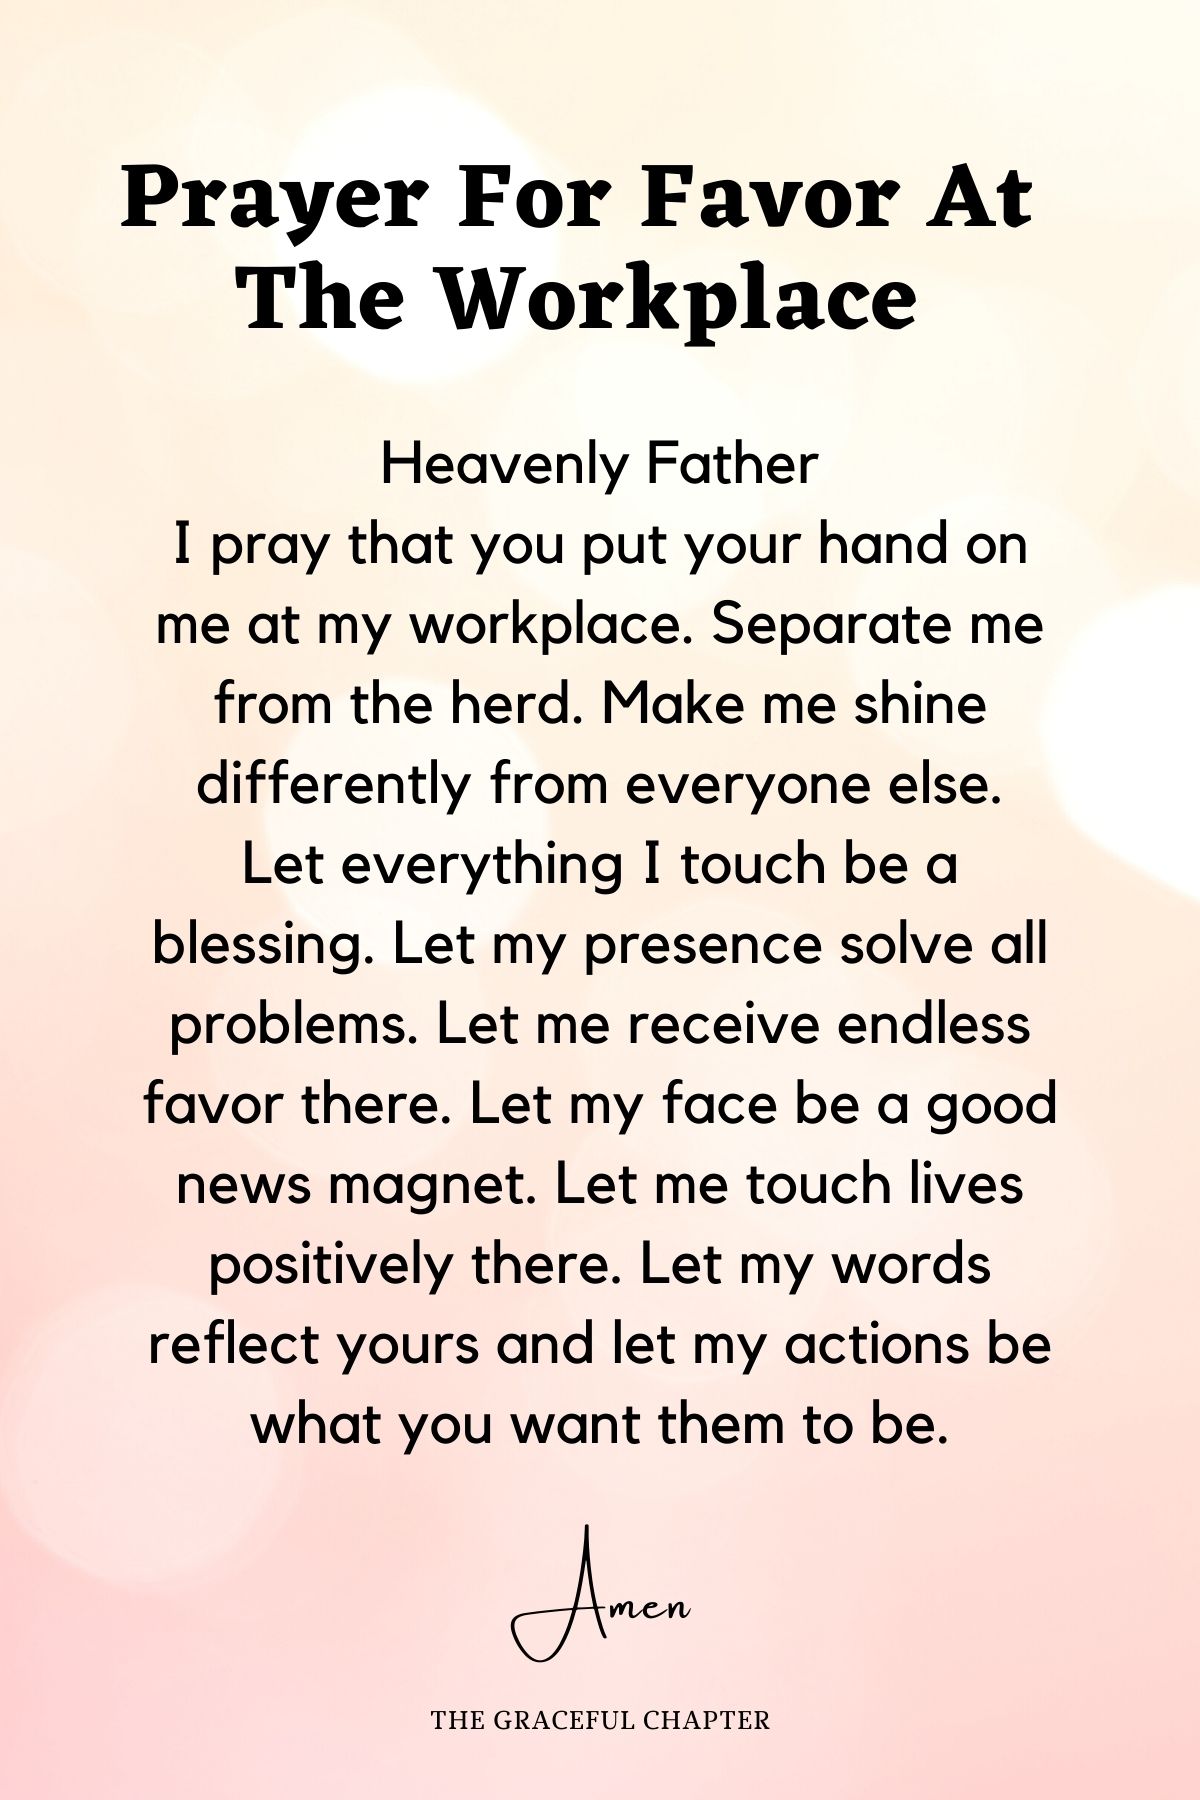 Prayer for favor at the workplace